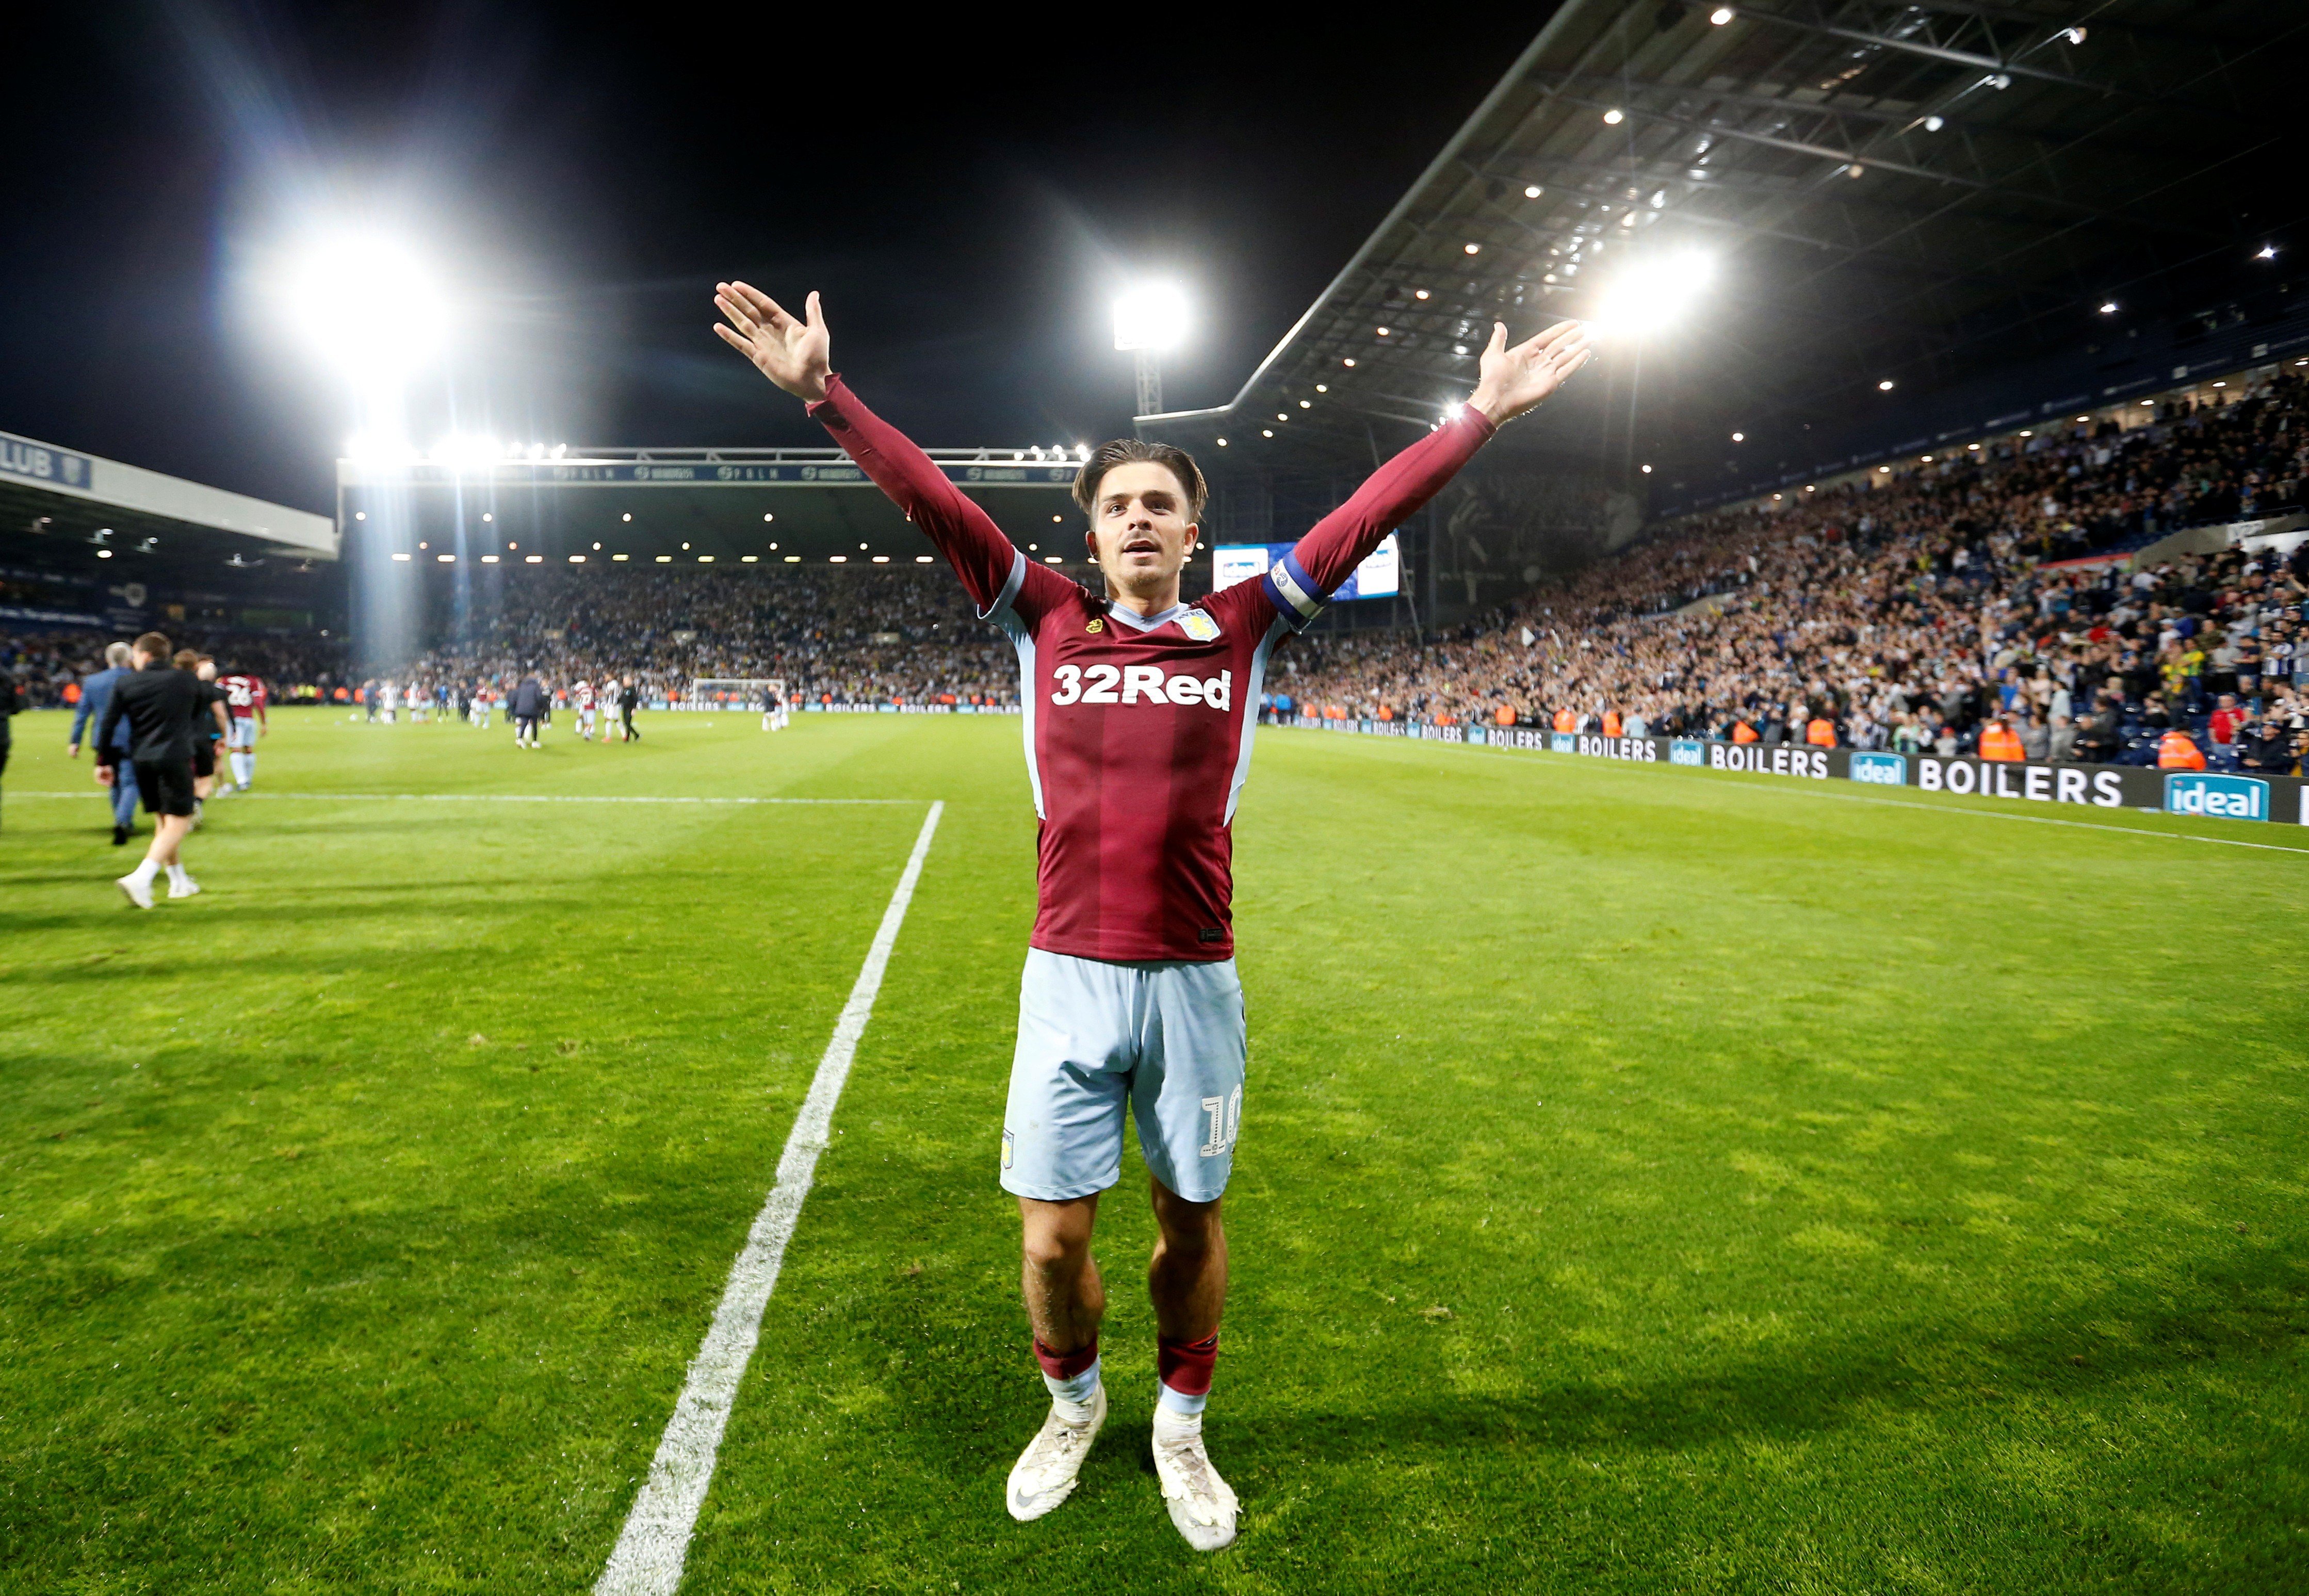 Aston Villa’s Jack Grealish thanks the crowd after winning the play-off semi-final to return to Wembley. Photo: Reuters